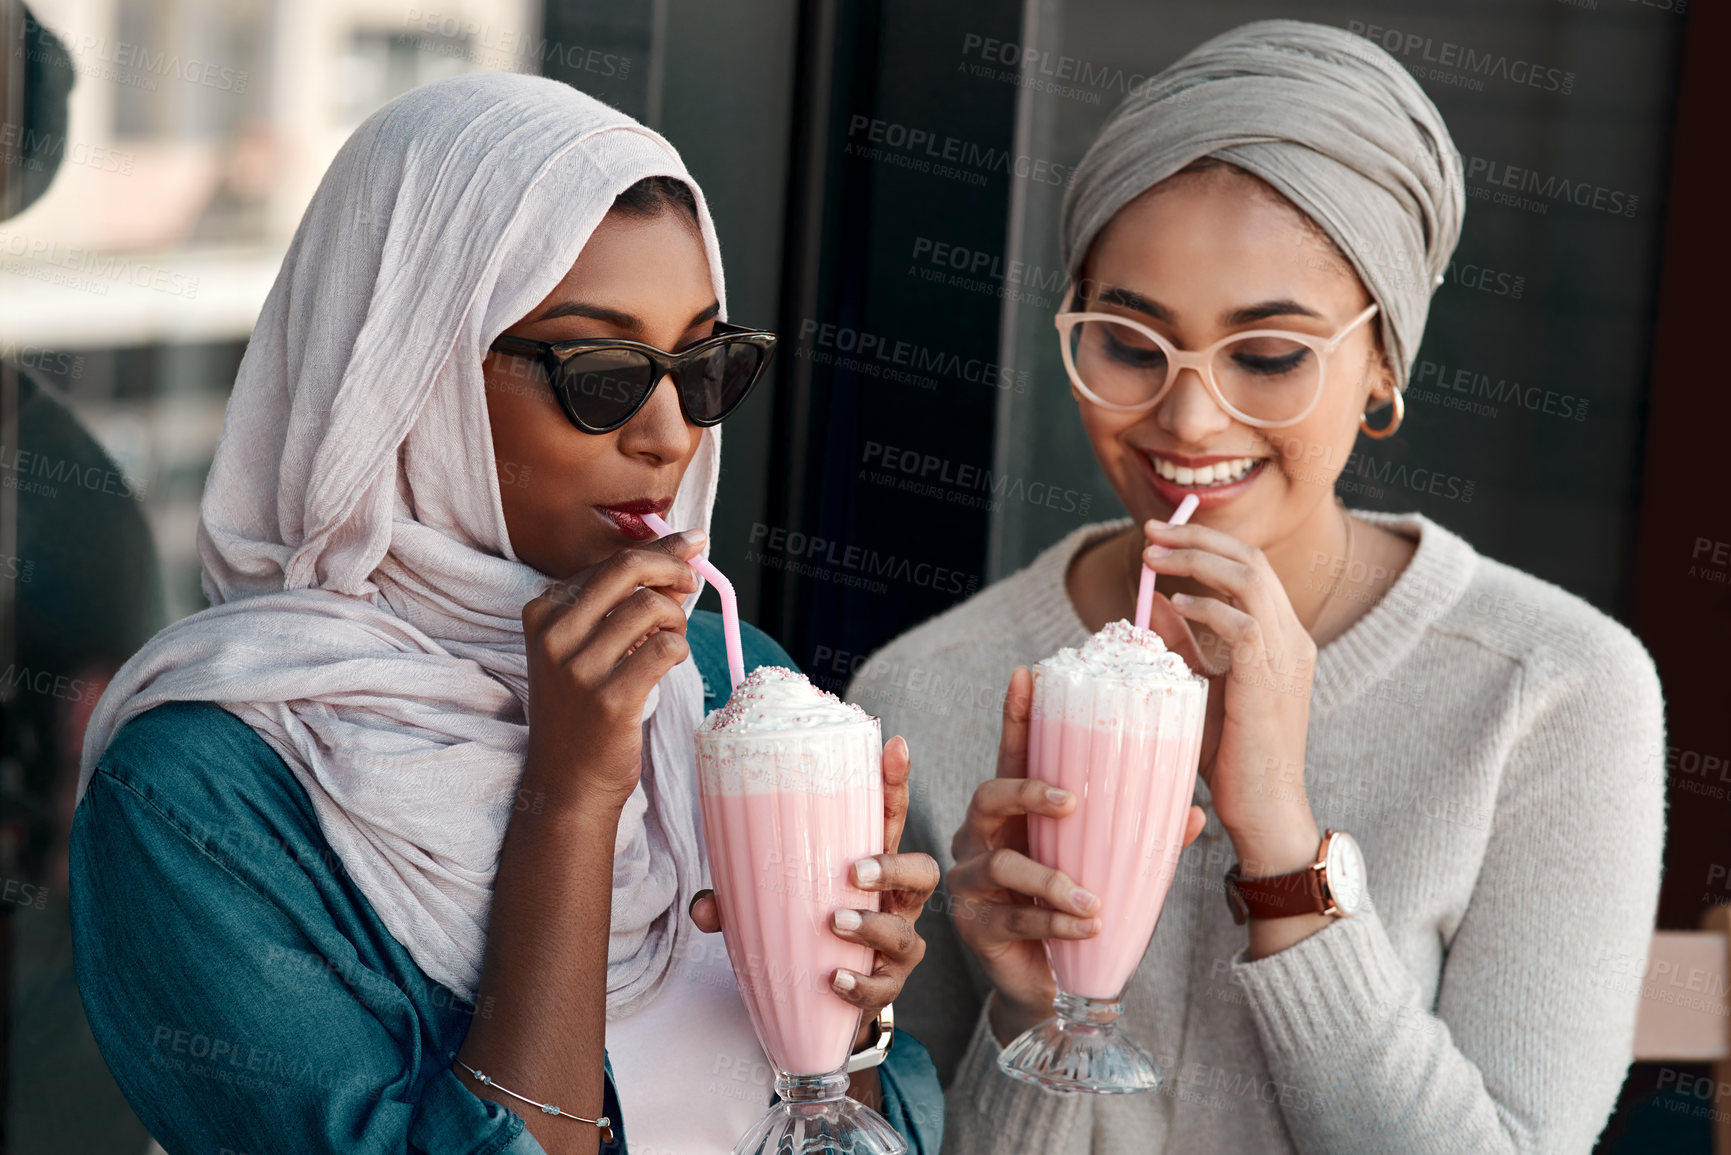 Buy stock photo Cropped shot of two affectionate young girlfriends having milkshakes together in a cafe while dressed in hijab